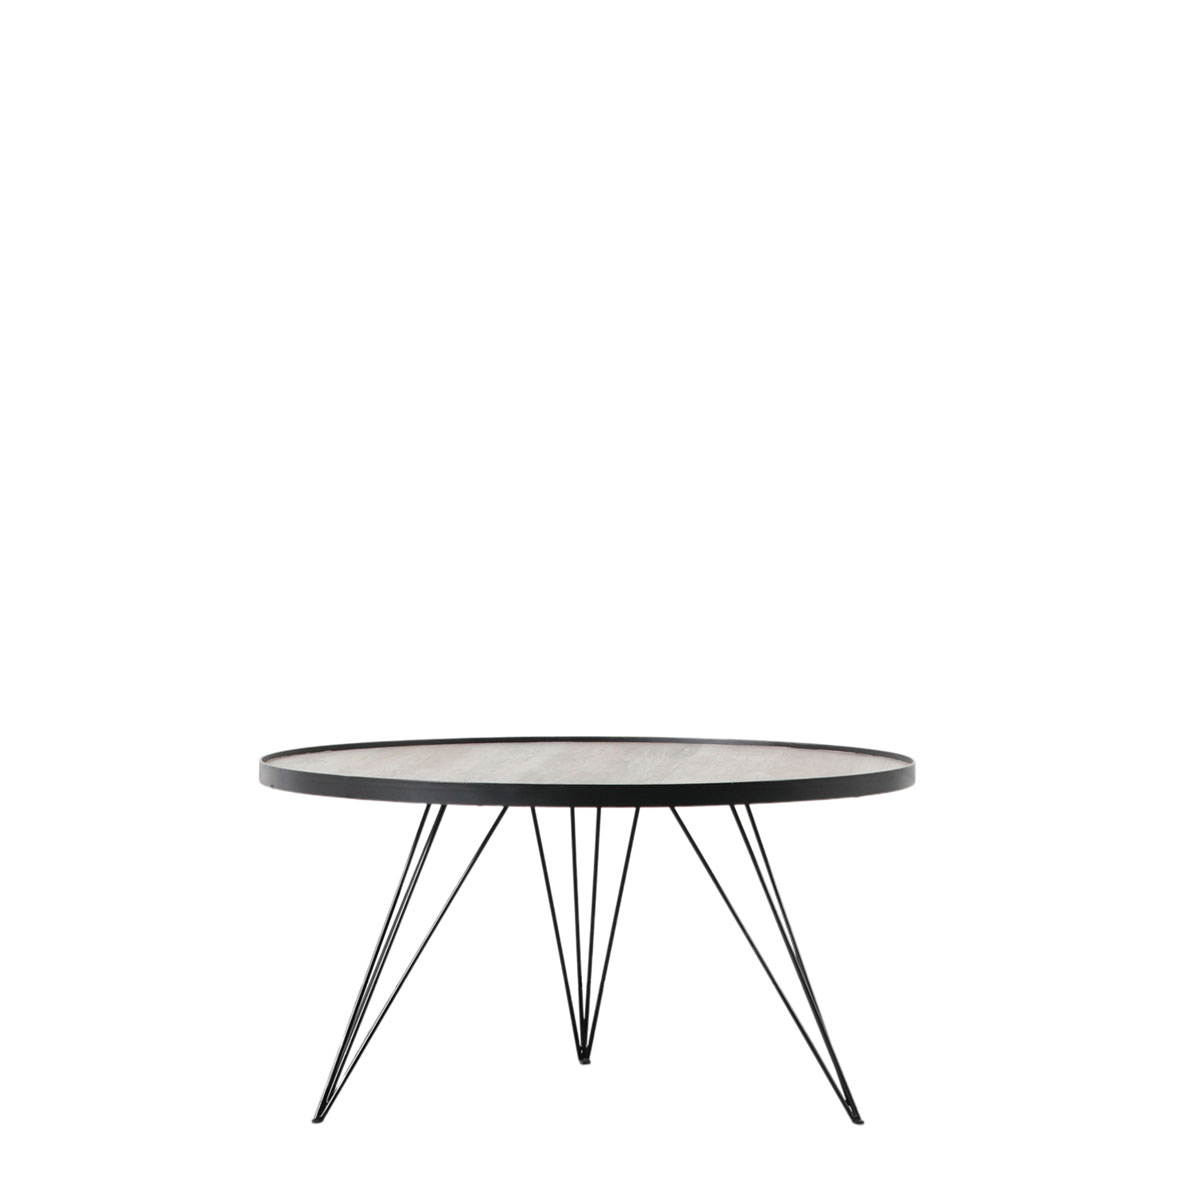 Tufnell Coffee Table 800x800x420mm